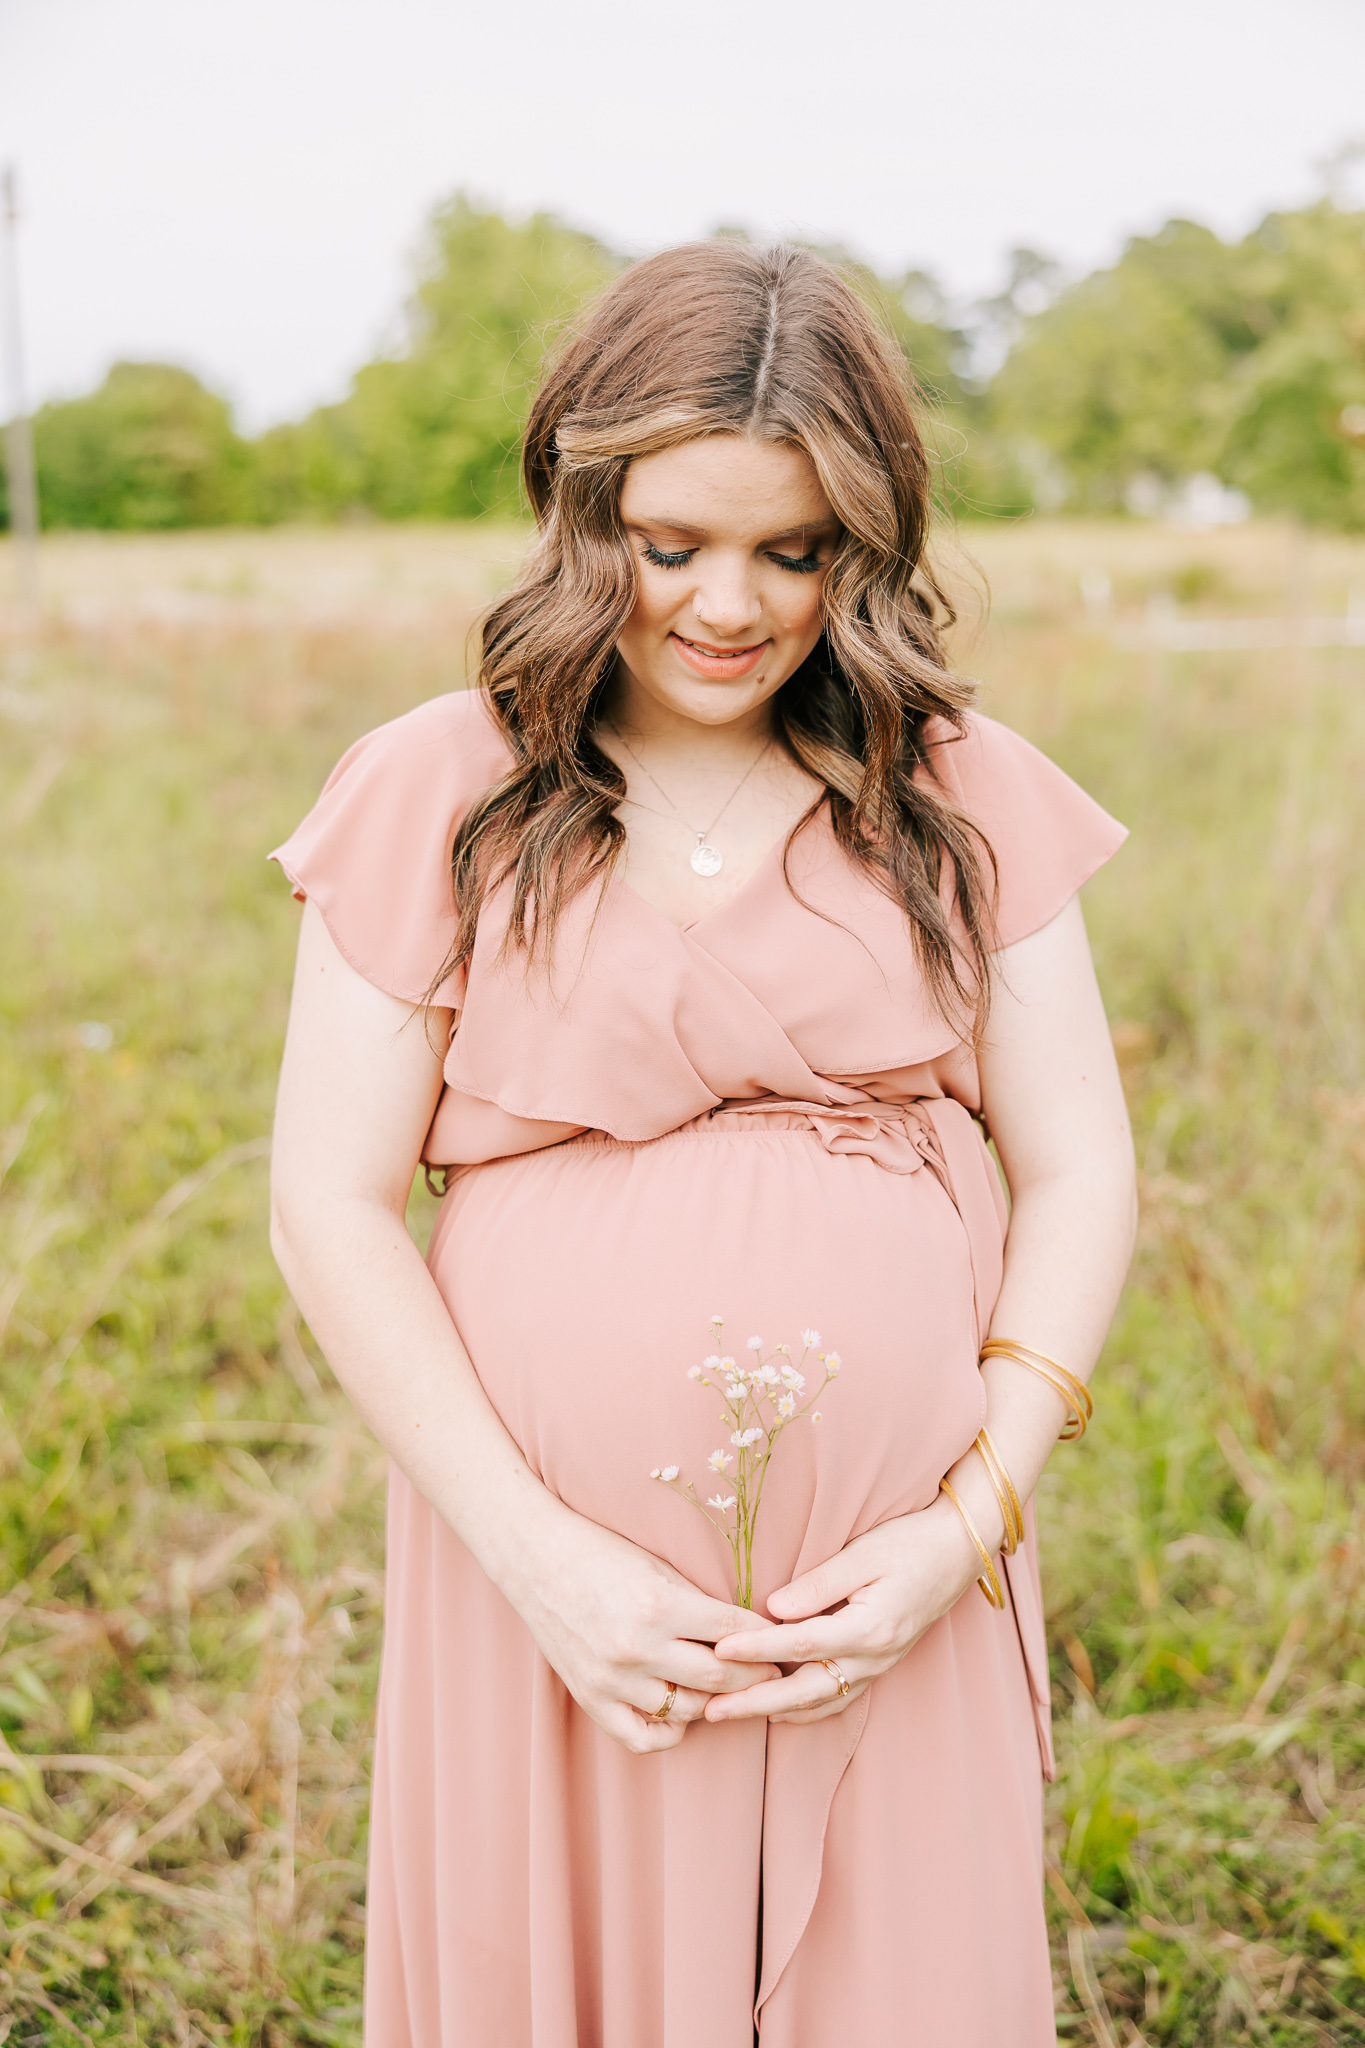 Expecting mom wearing a pink dress during her maternity session